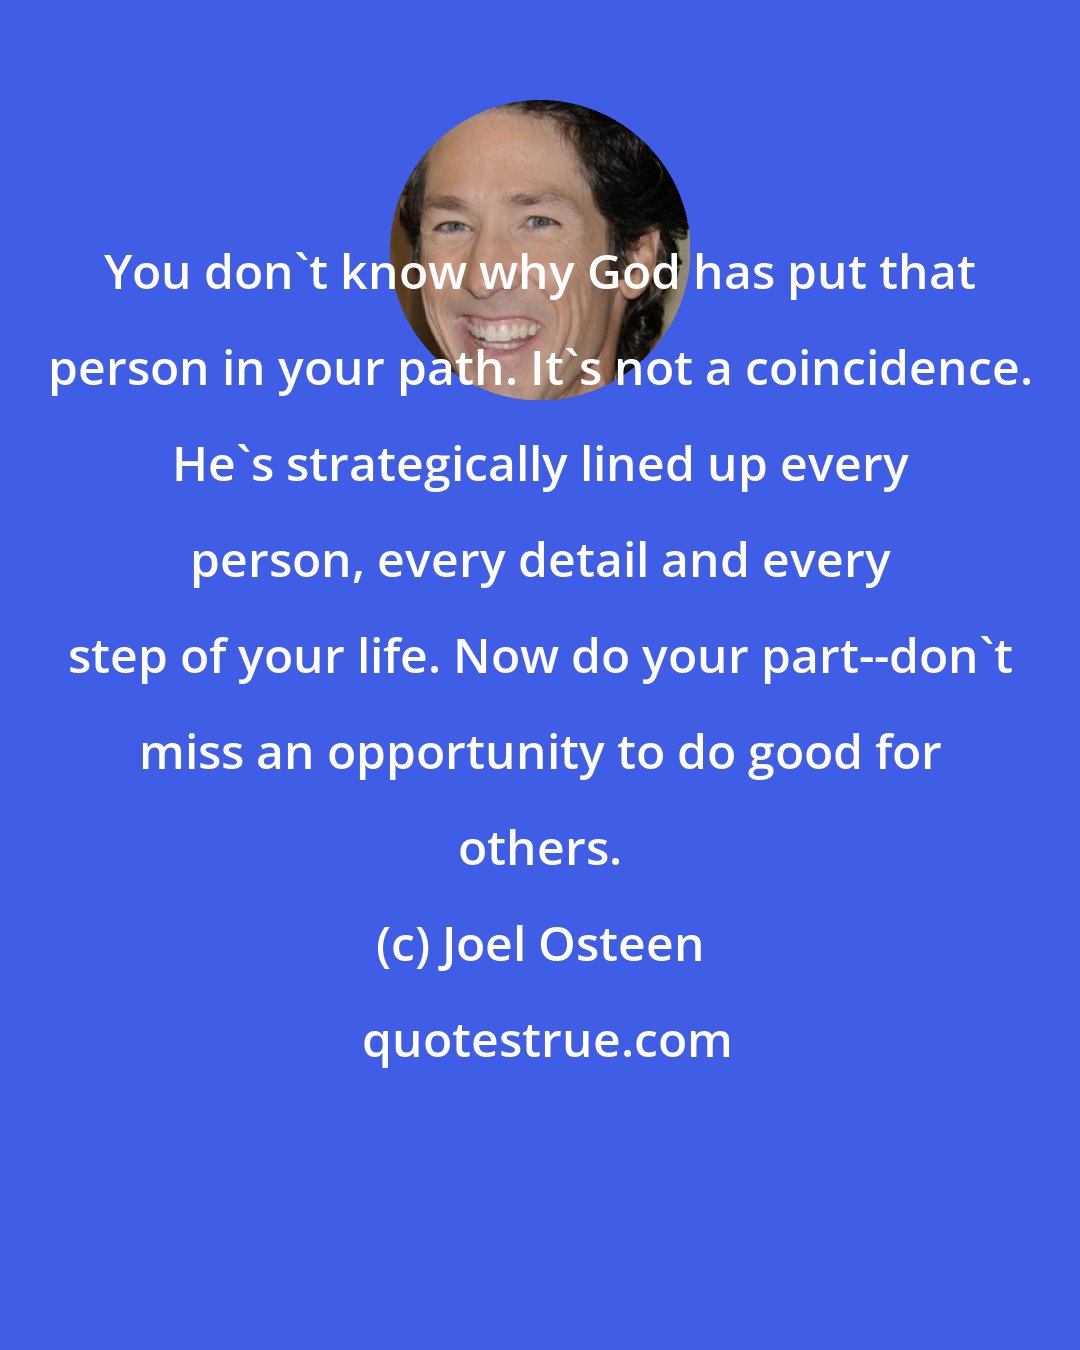 Joel Osteen: You don't know why God has put that person in your path. It's not a coincidence. He's strategically lined up every person, every detail and every step of your life. Now do your part--don't miss an opportunity to do good for others.